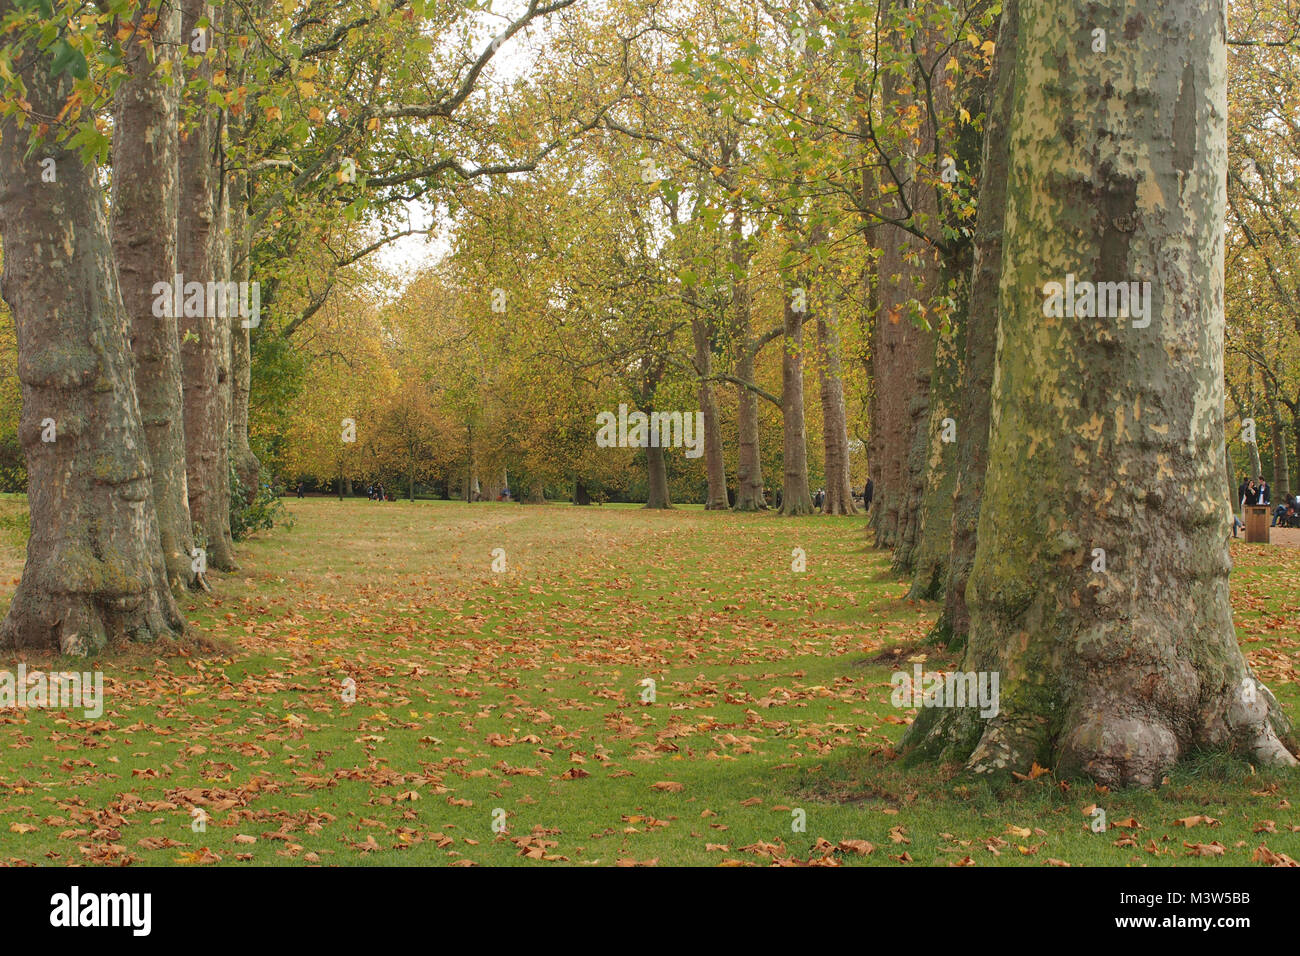 Avenue of mature trees in Kensington Gardens, a Royal Park, in London Stock Photo